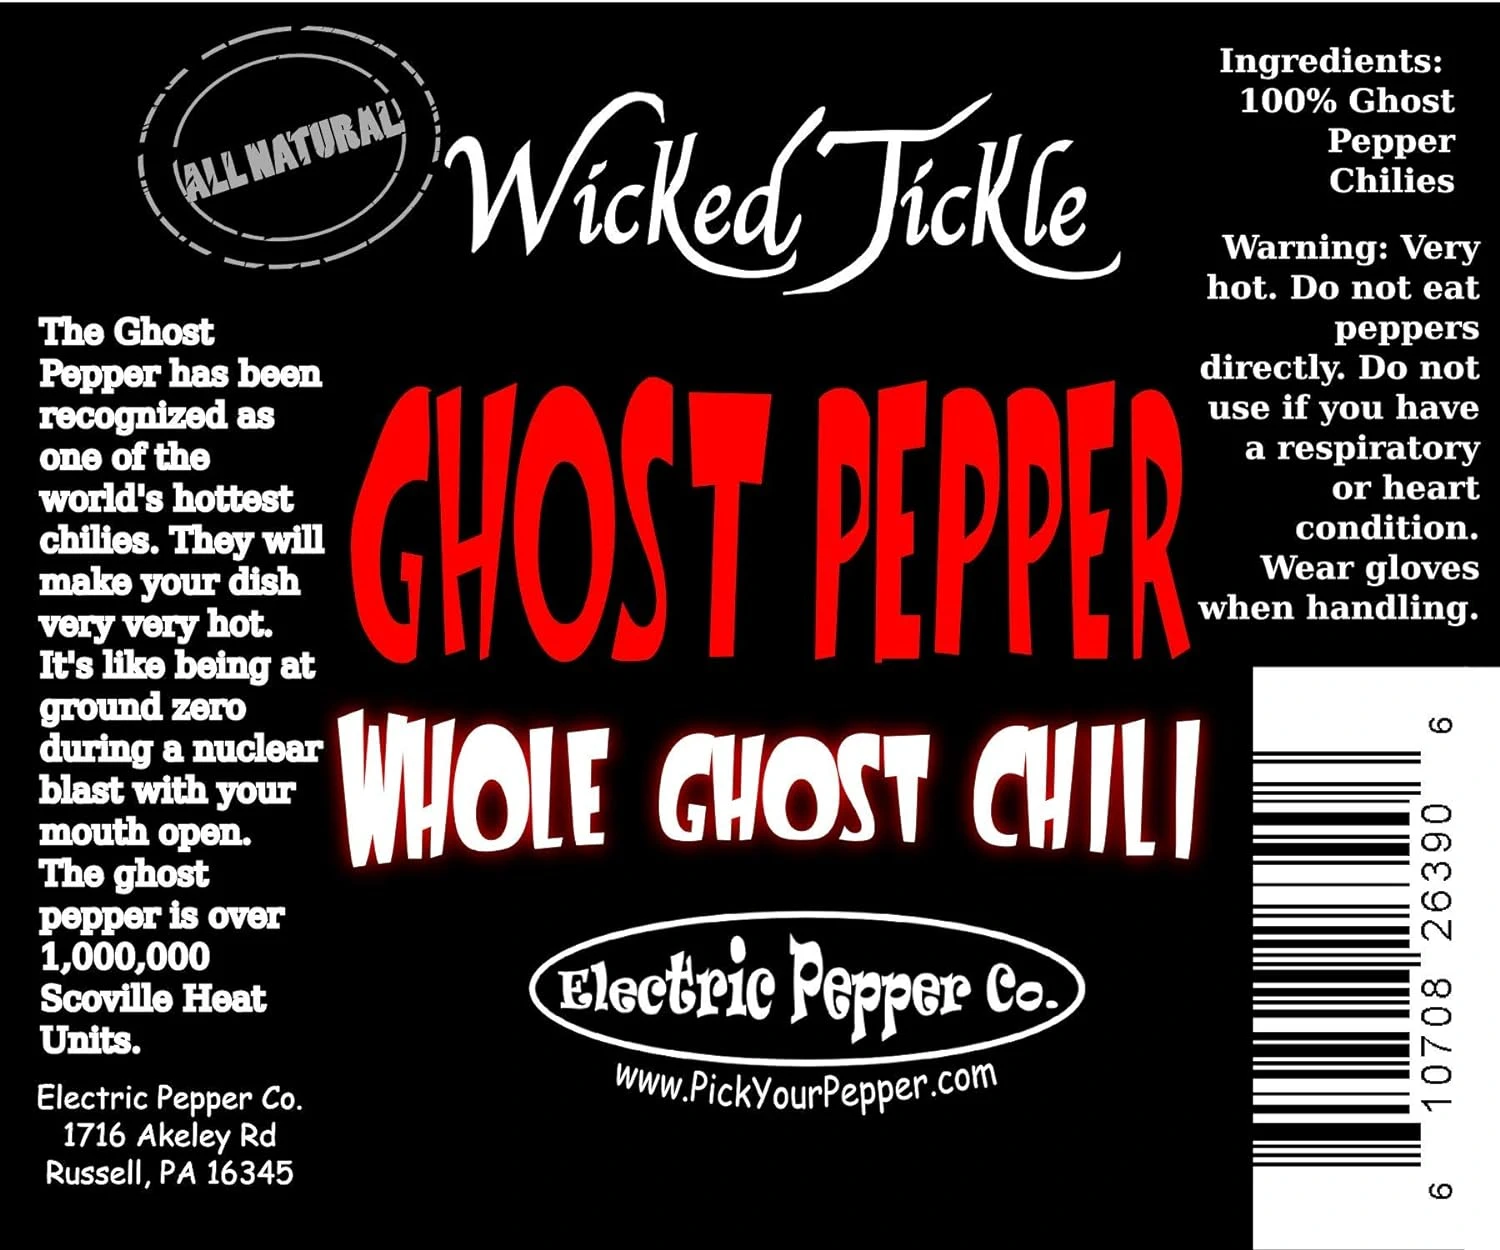 Product Label For Electric Pepper Ghost Peppers - 
12 Count